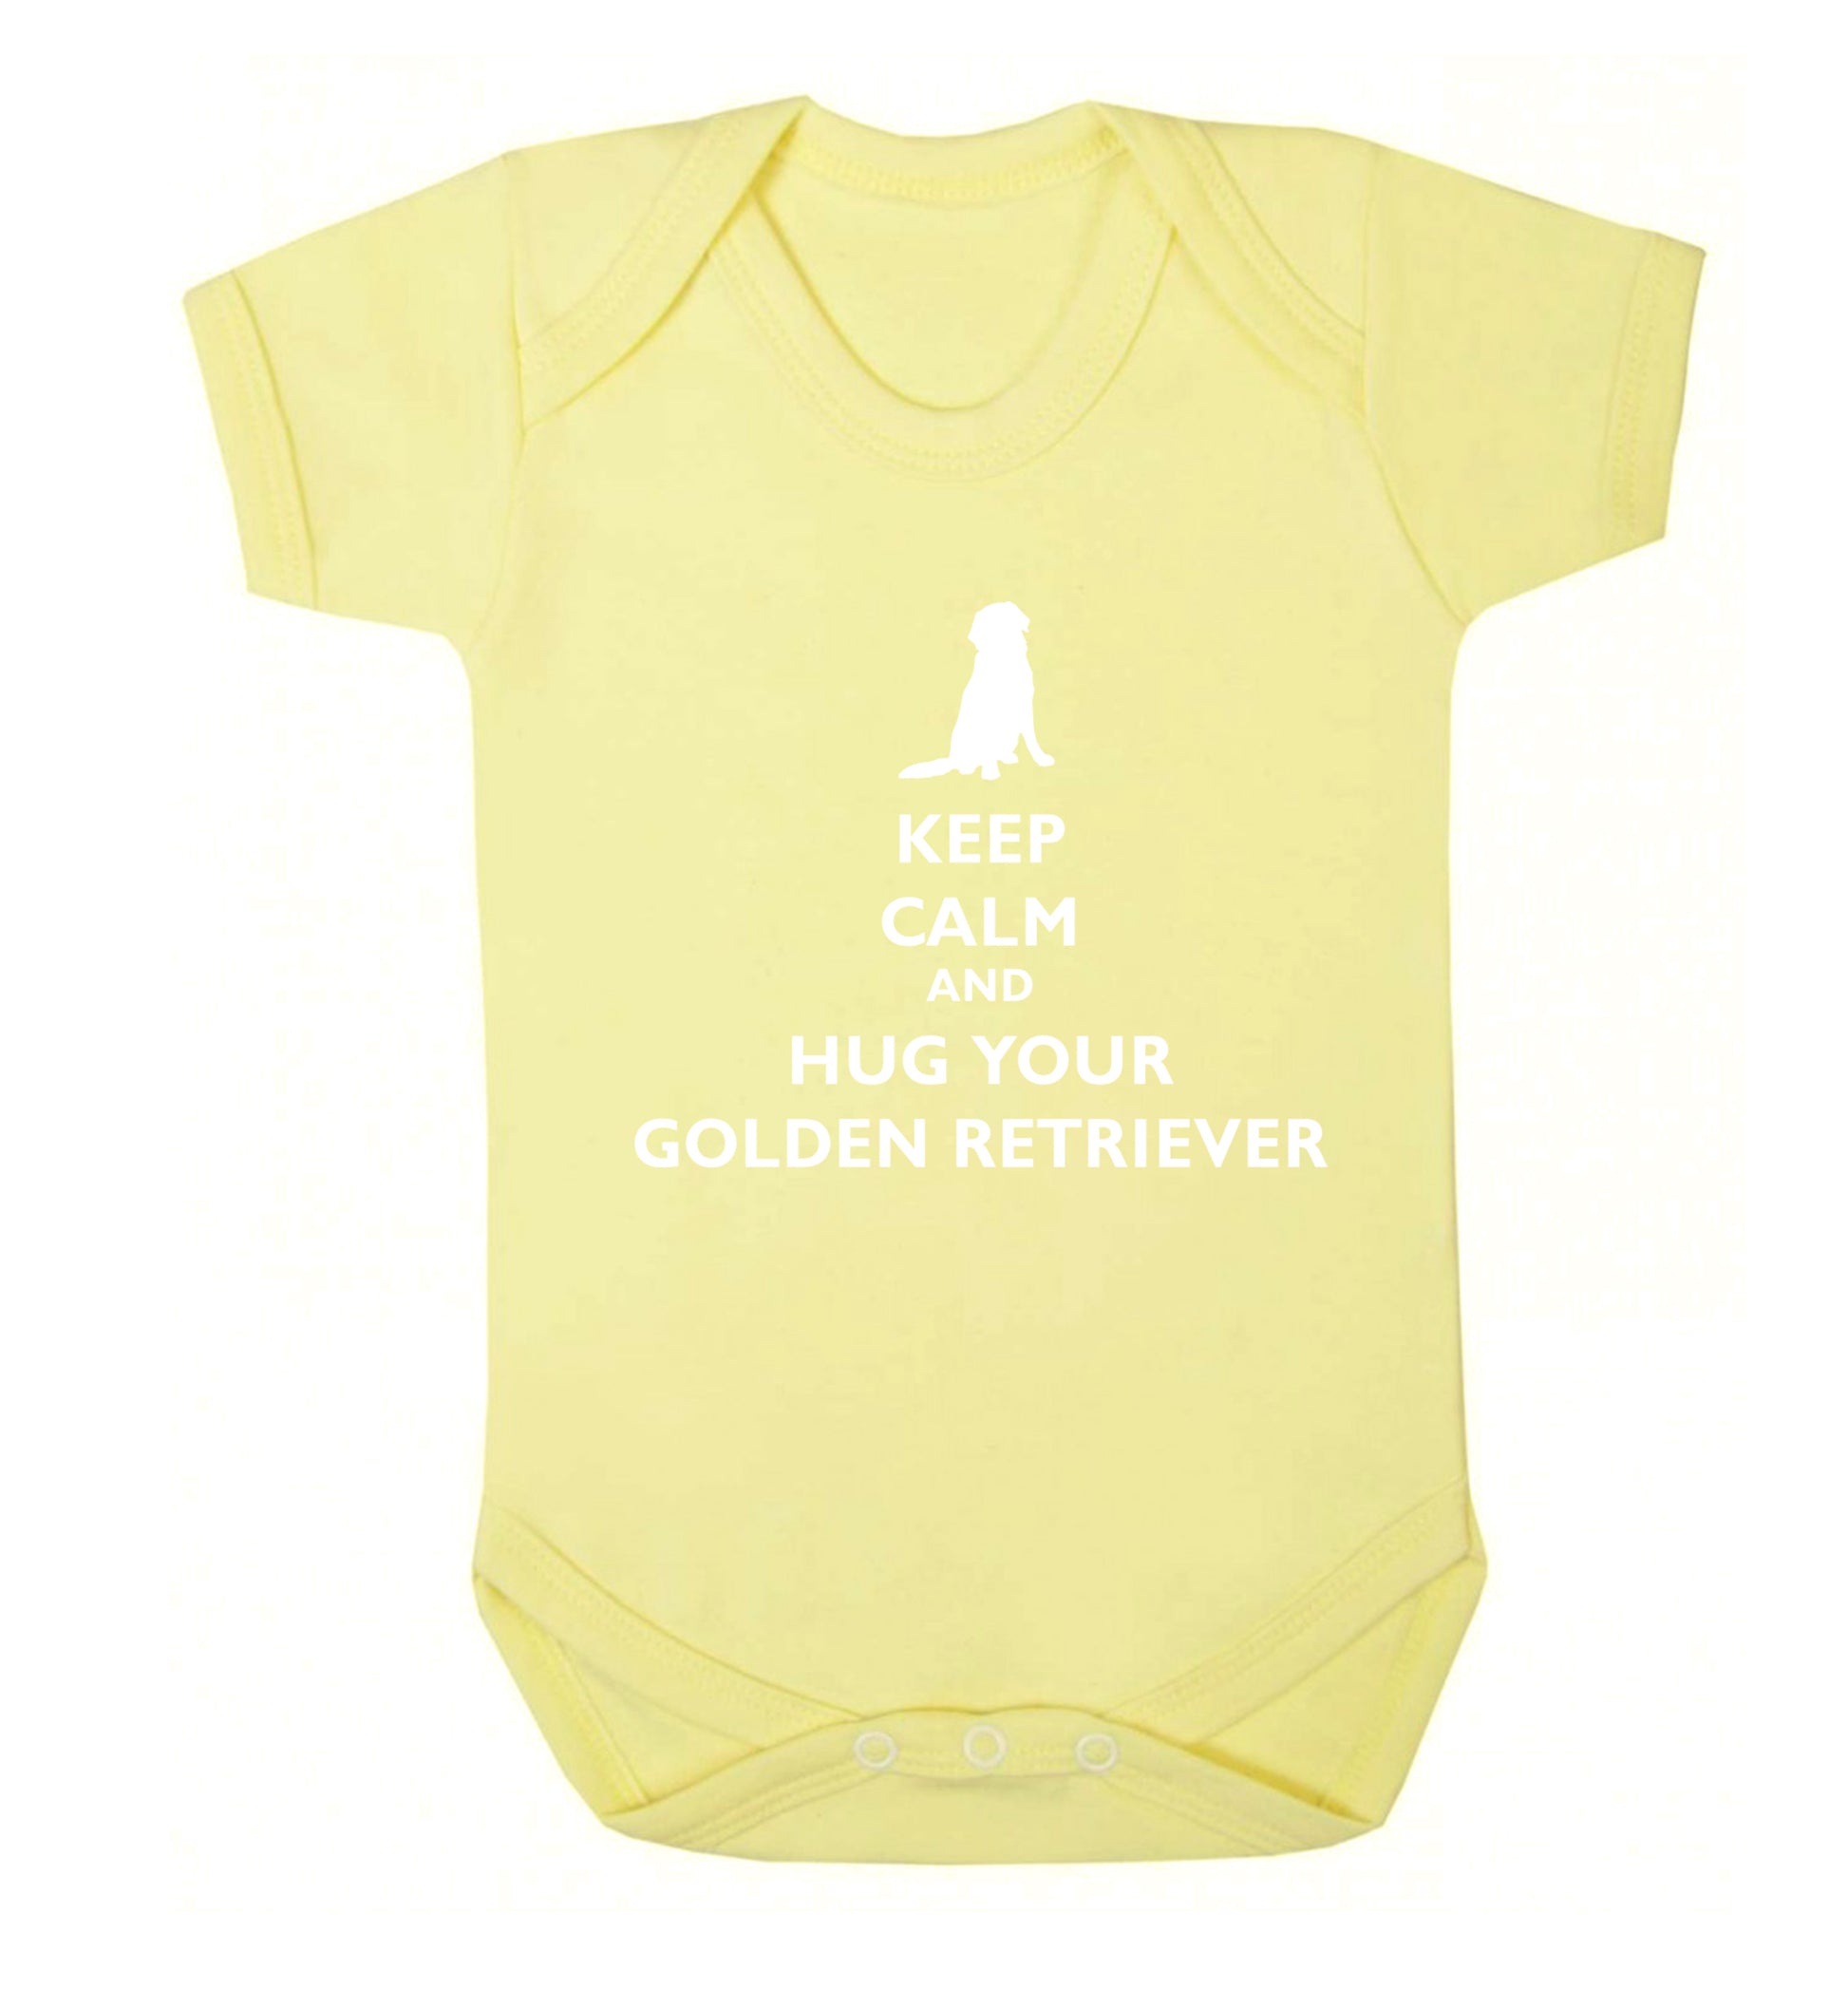 Keep calm and hug your golden retriever Baby Vest pale yellow 18-24 months